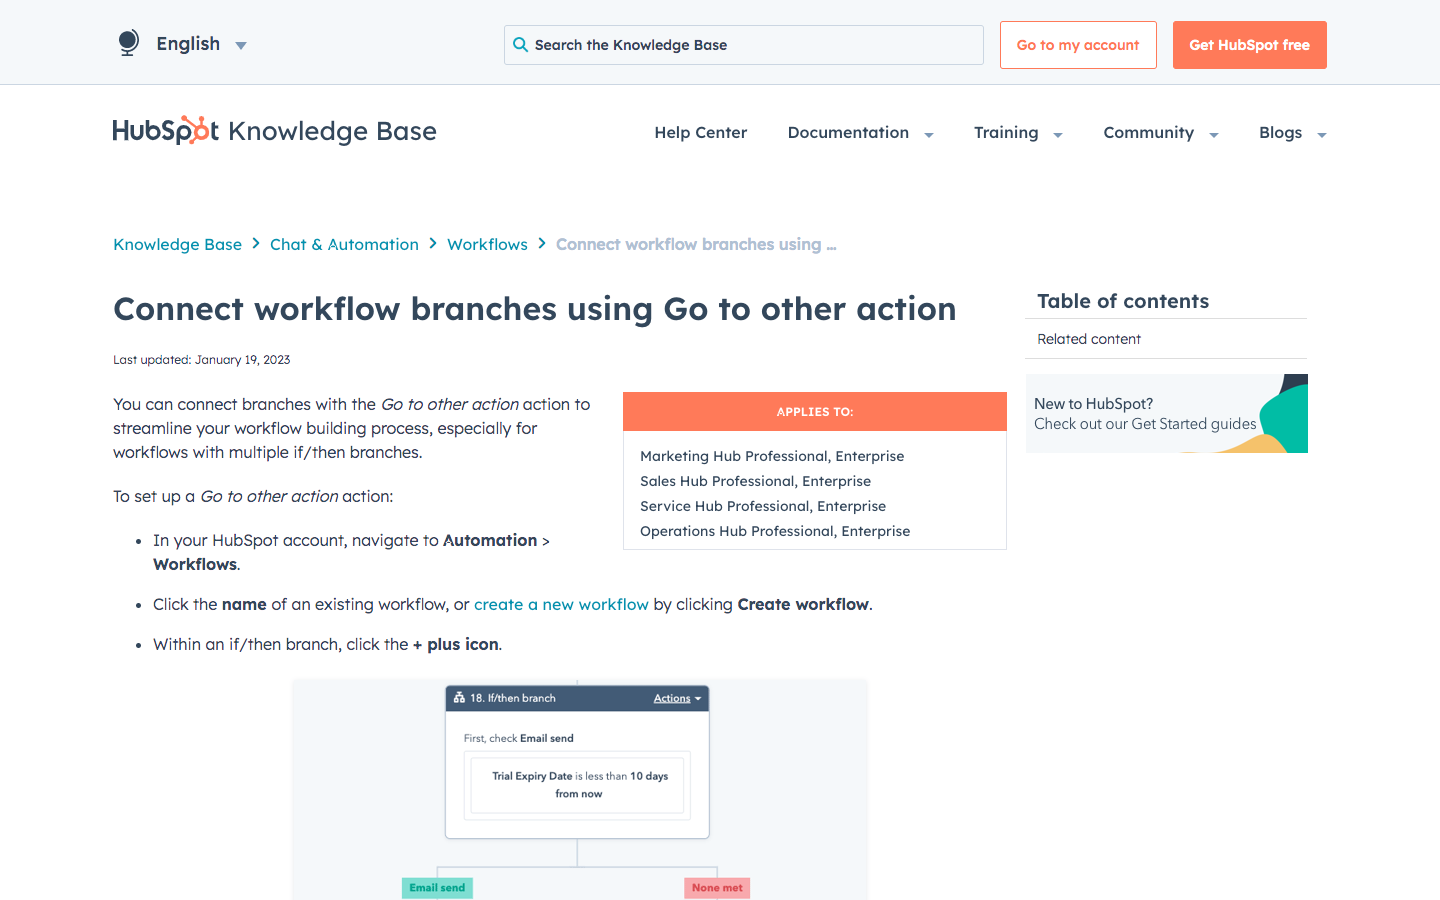 A screenshot from the HubSpot Knowledge Base: Connect workflow branches using 'Go to other action'